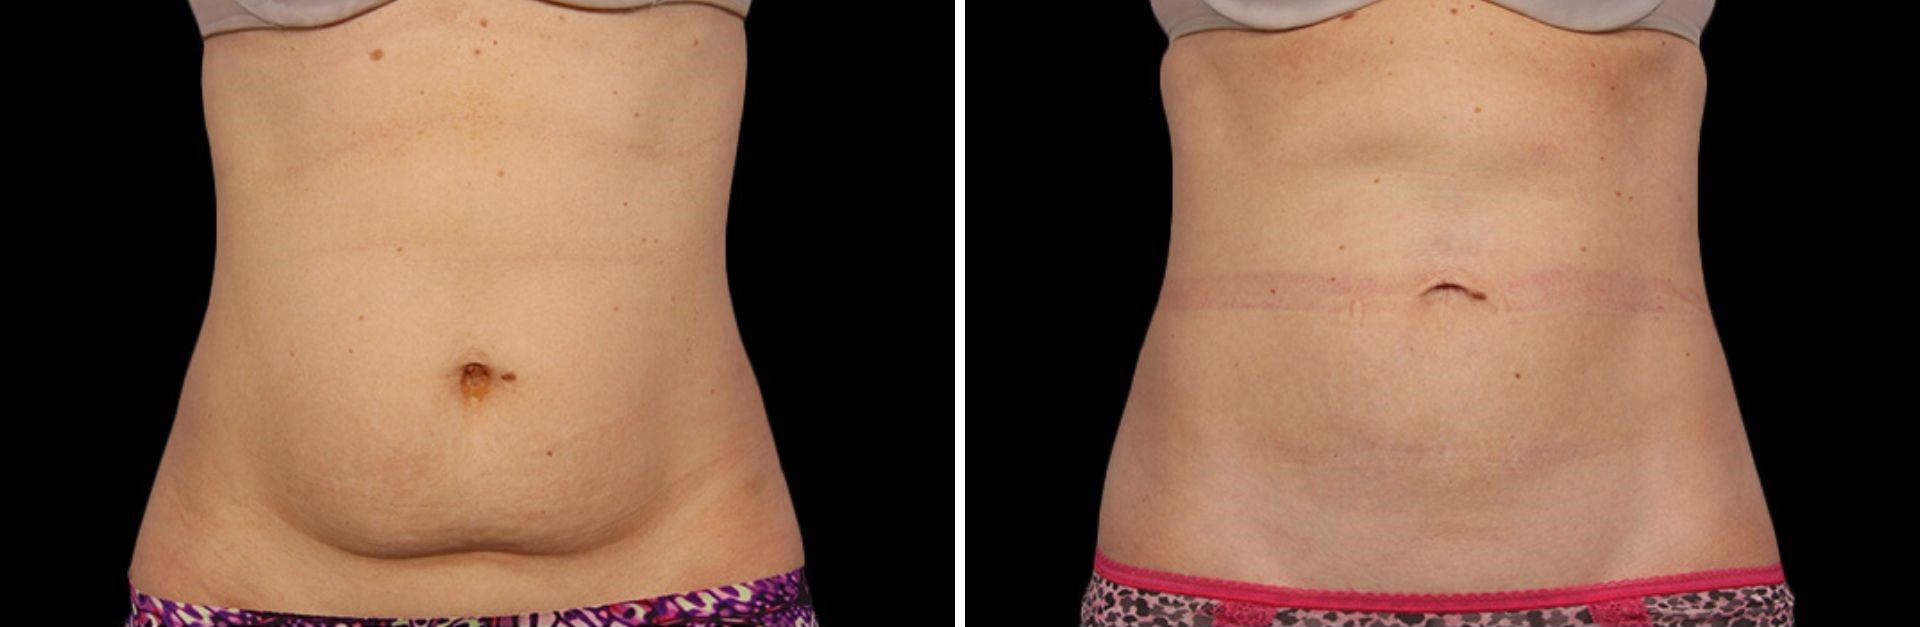 CoolSculpting for Bra and Upper Back Fat - Contour Dermatology